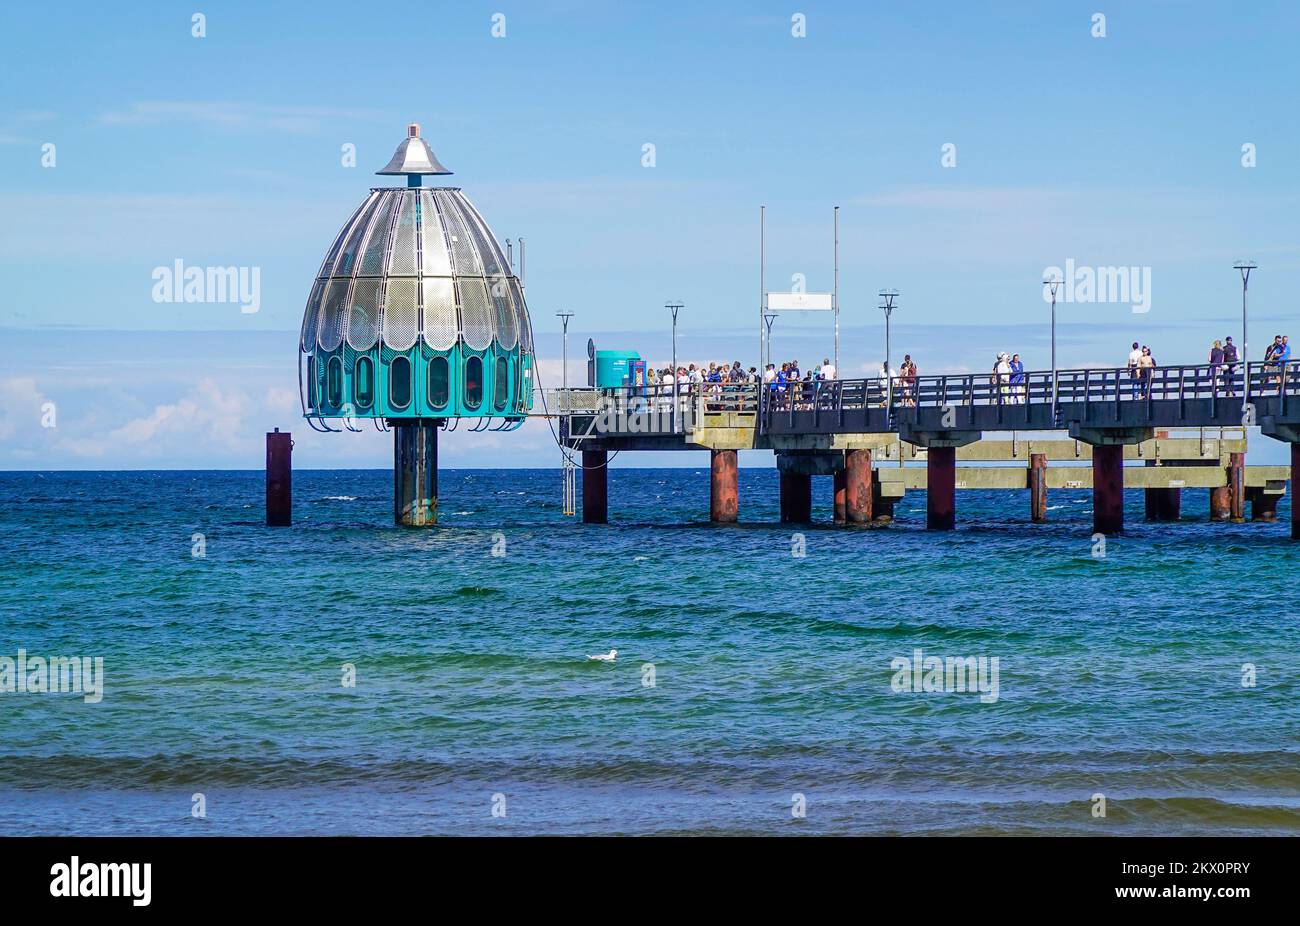 photography hi-res Zingst stock and - Alamy images seebrucke